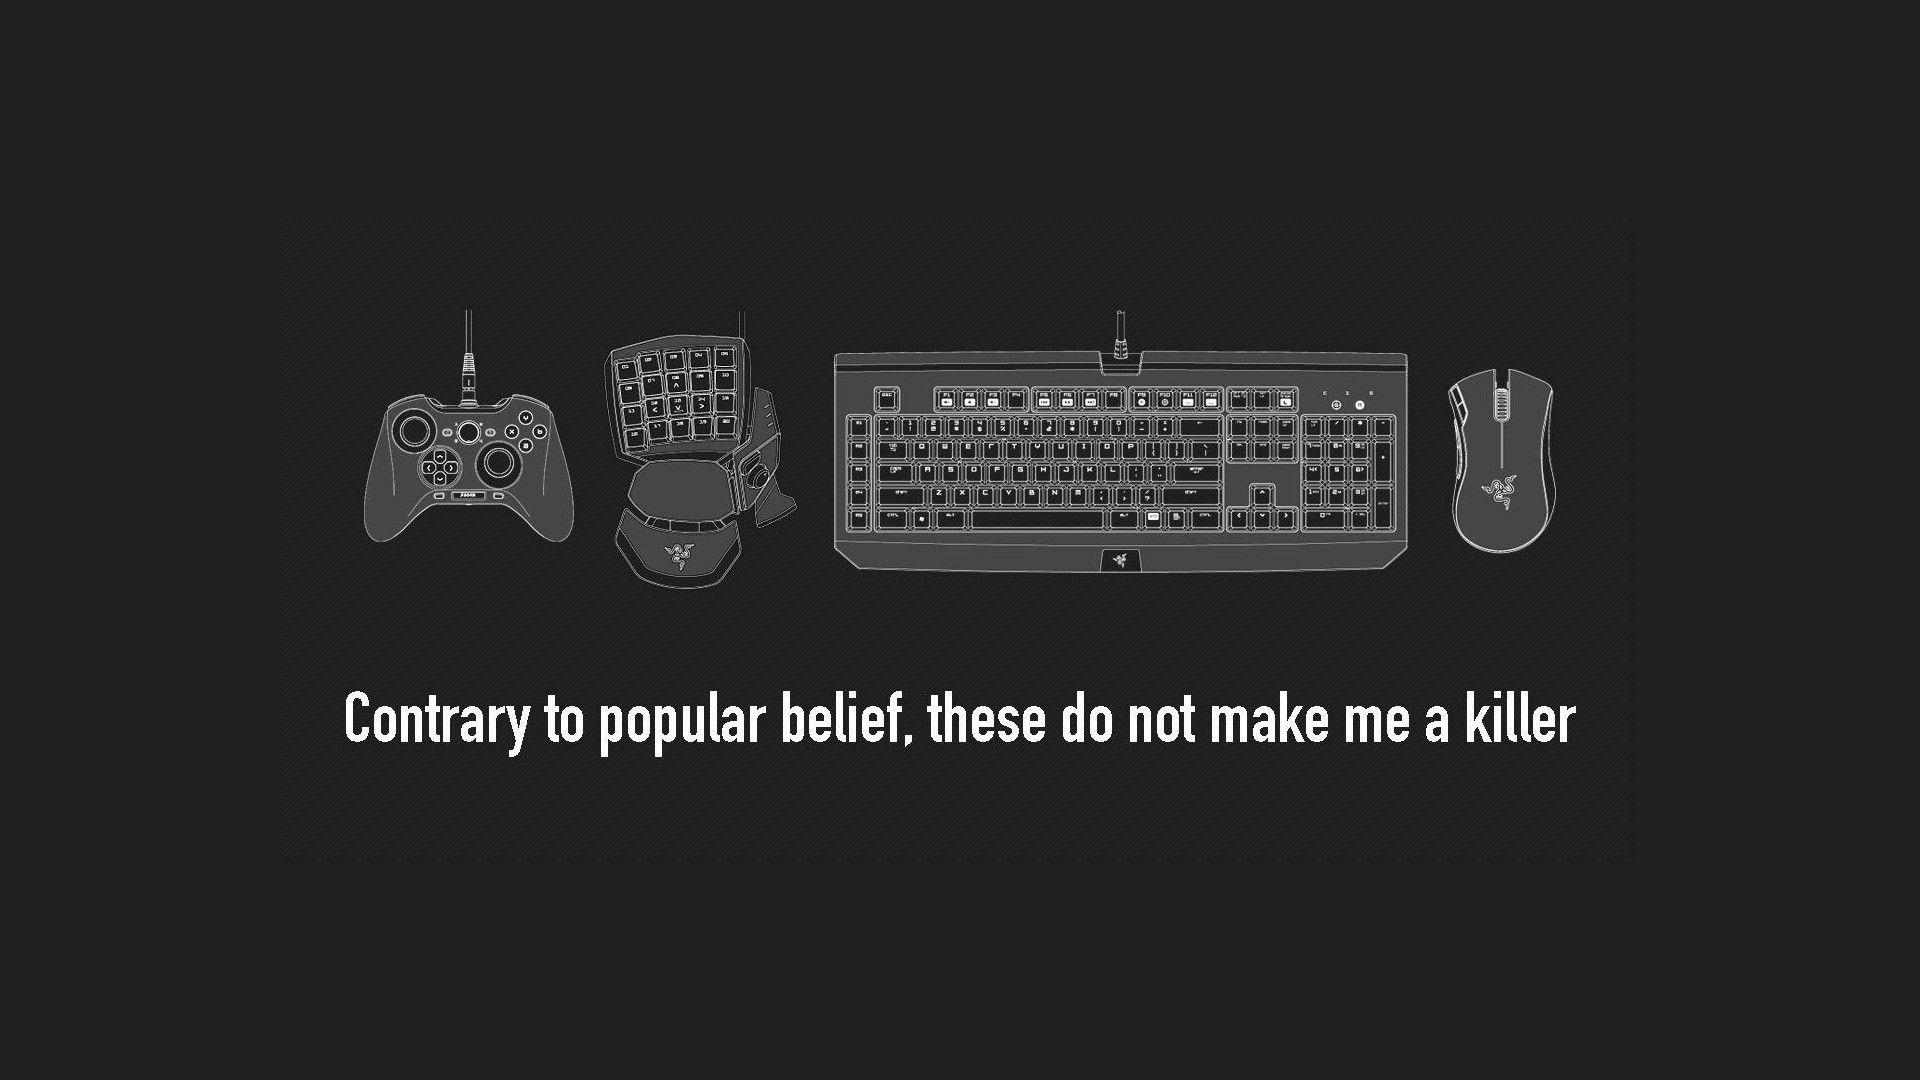 video games, quotes, keyboards, Razer, monochrome, controllers, mice